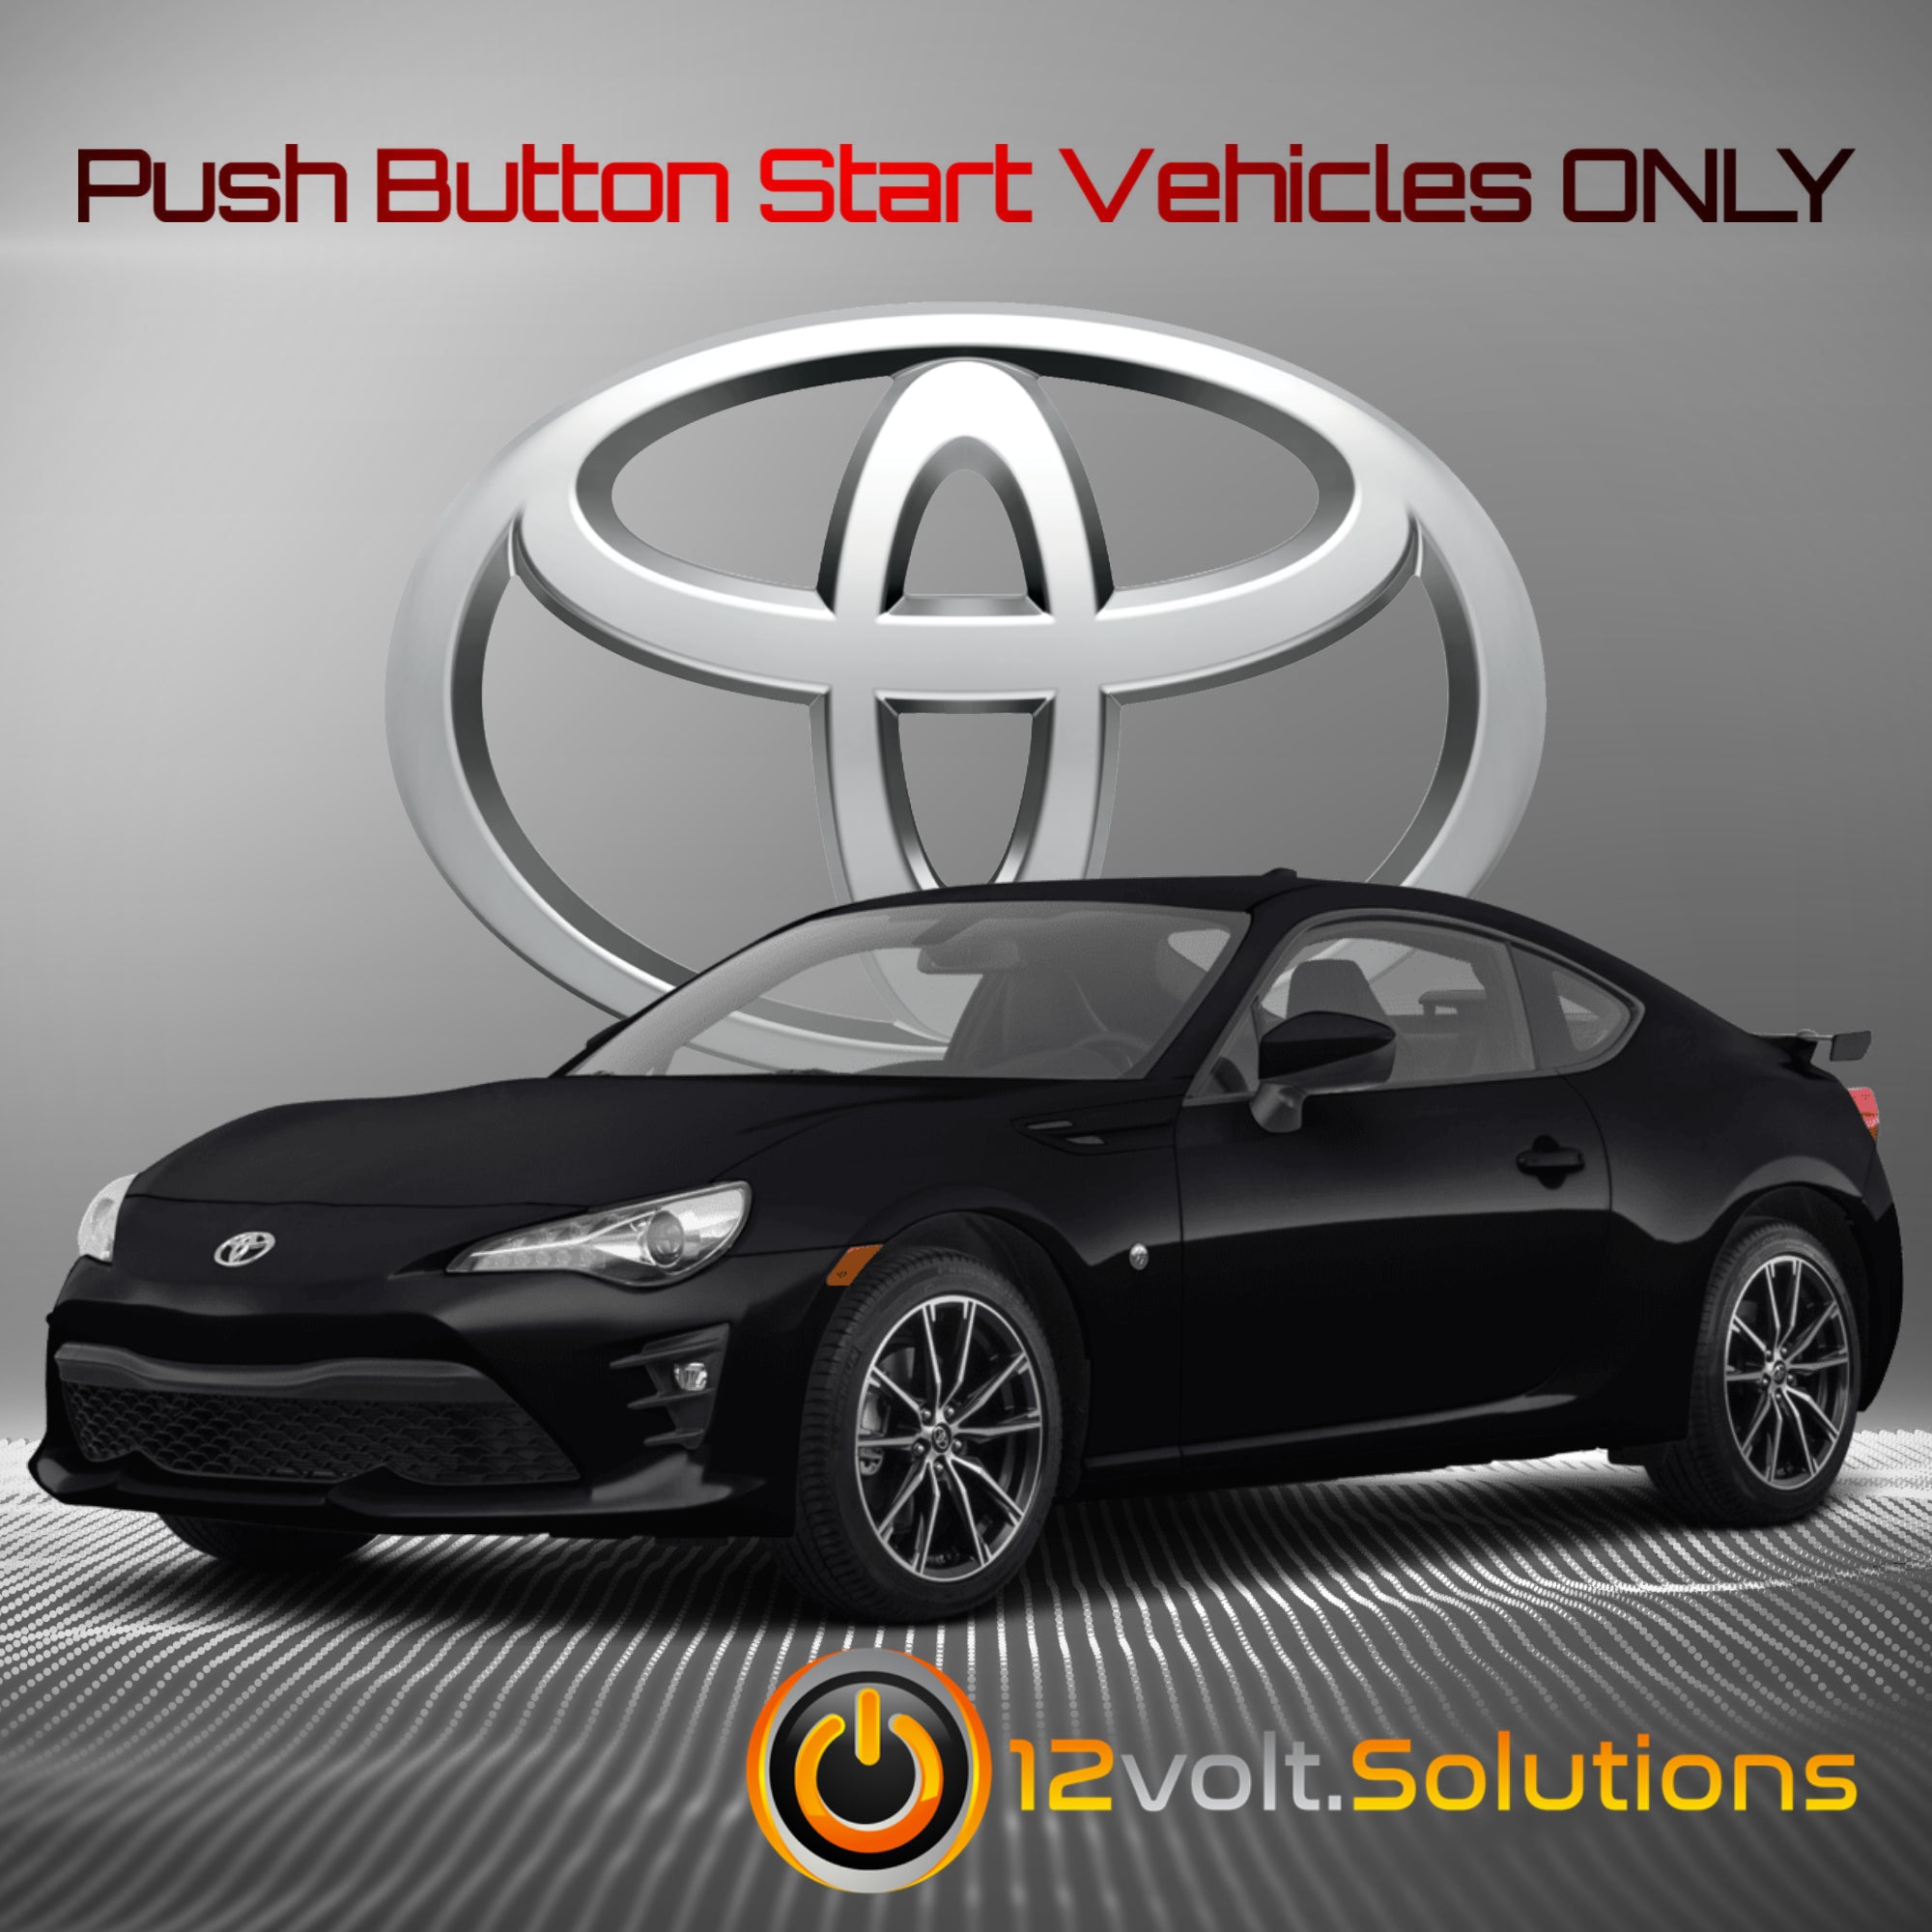 2017-2019 Toyota 86 Plug and Play Remote Start Kit (Push Button Start)-12Volt.Solutions